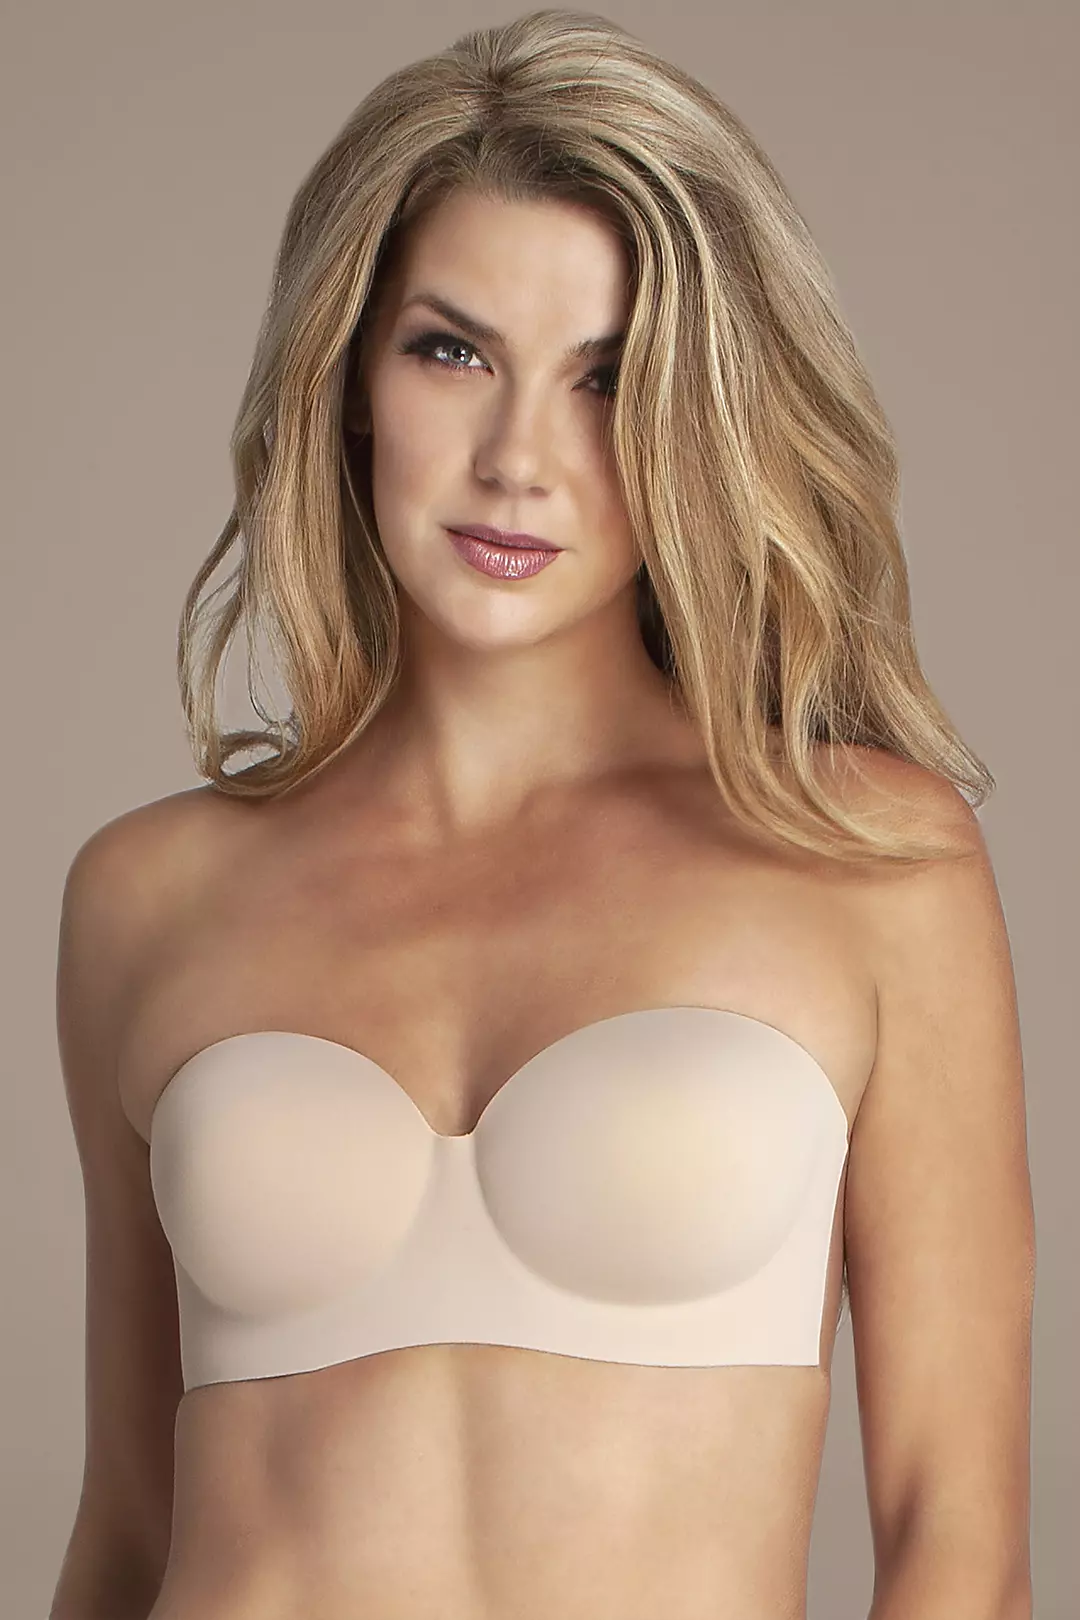 This Adhesive Bra Makes Backless and Strapless Possibilities